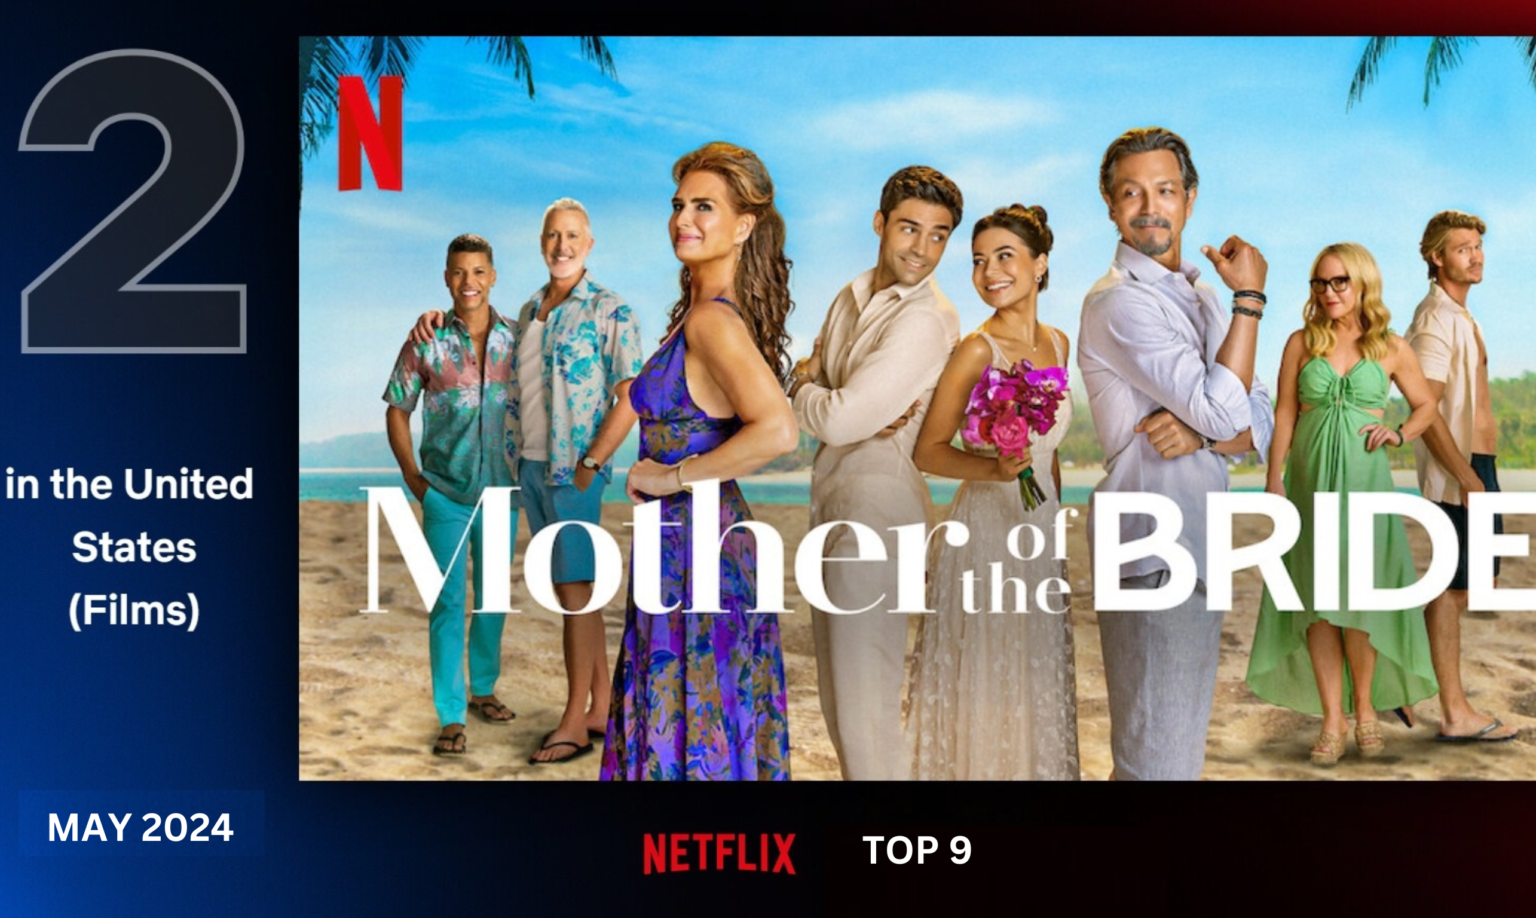 Top-9-Web-series-and-Movie-of-Netflix-in-United-State-Thumbnail-Image-2-Cherry-streamers